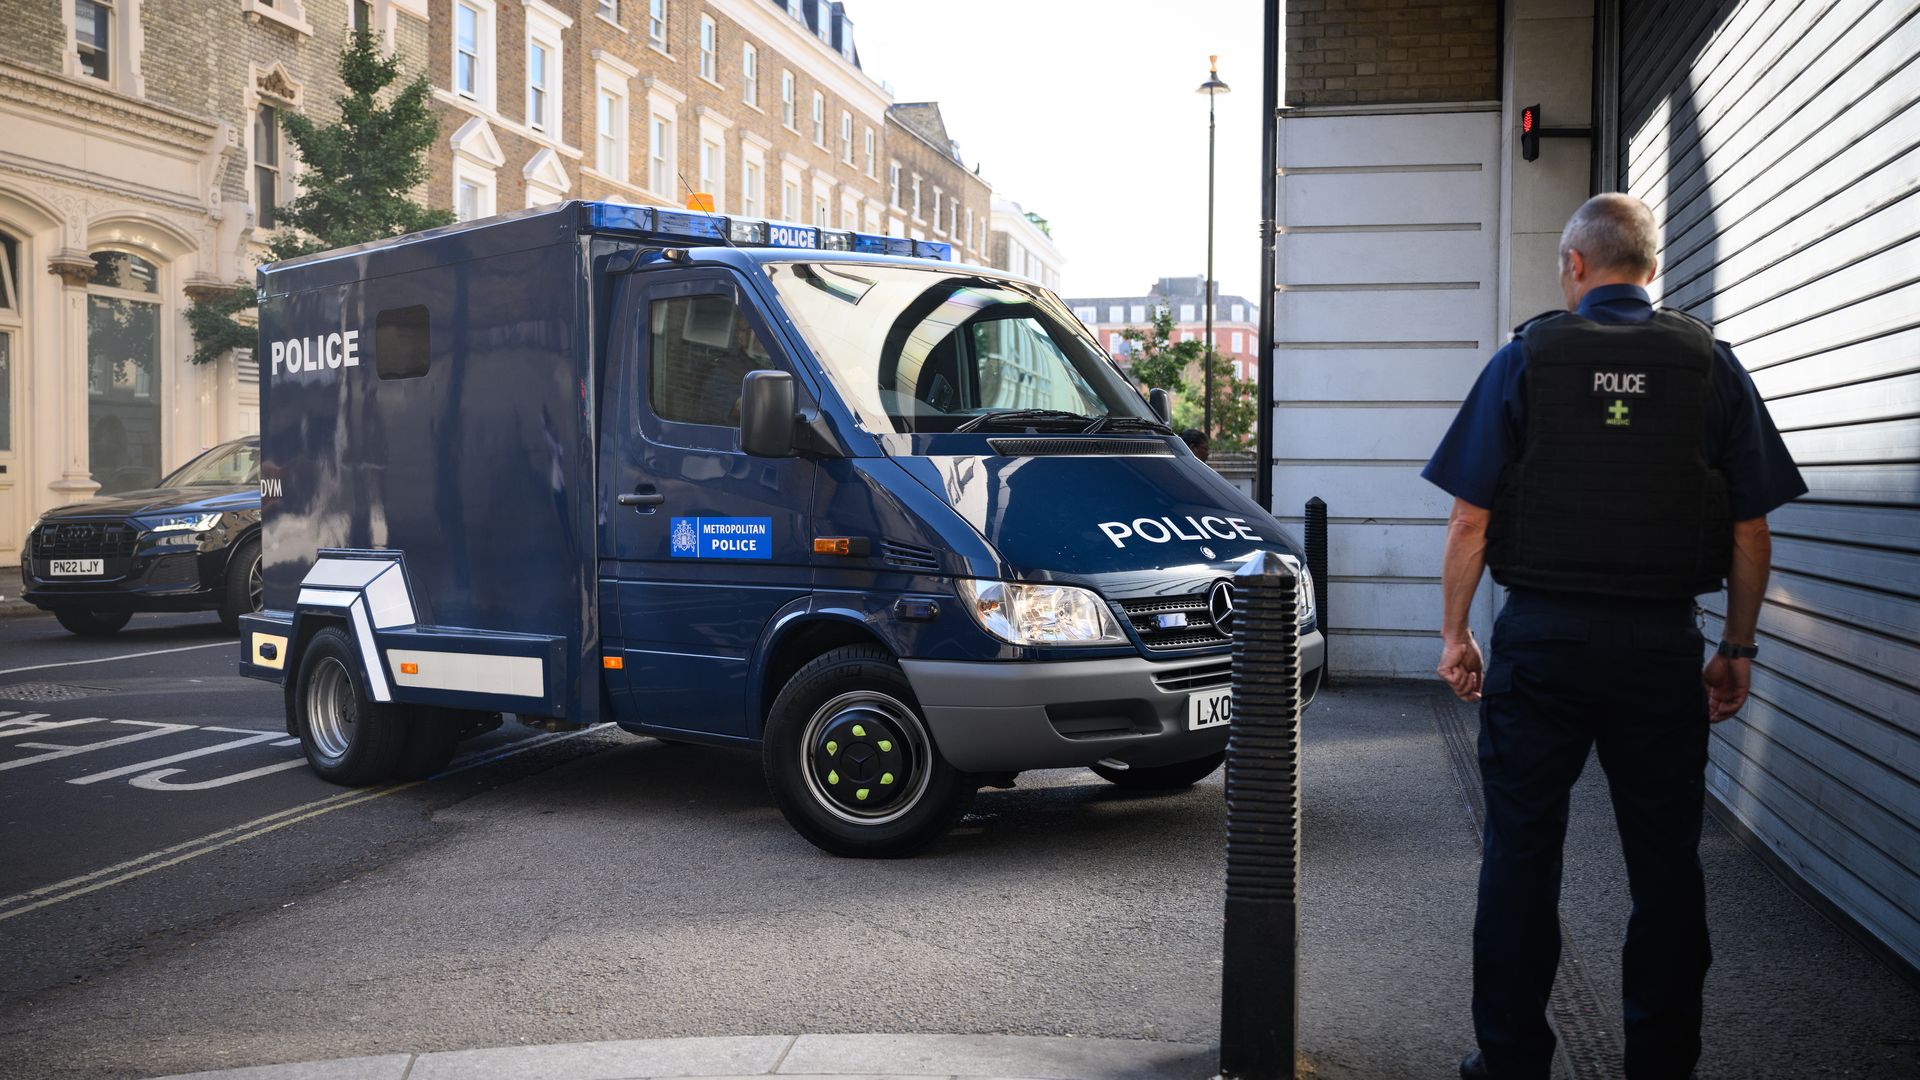 An armoured police van, believed to be carrying Aine Davis, arrives at The City of Westminster Magistrates Court on August 11, 2022 in London,